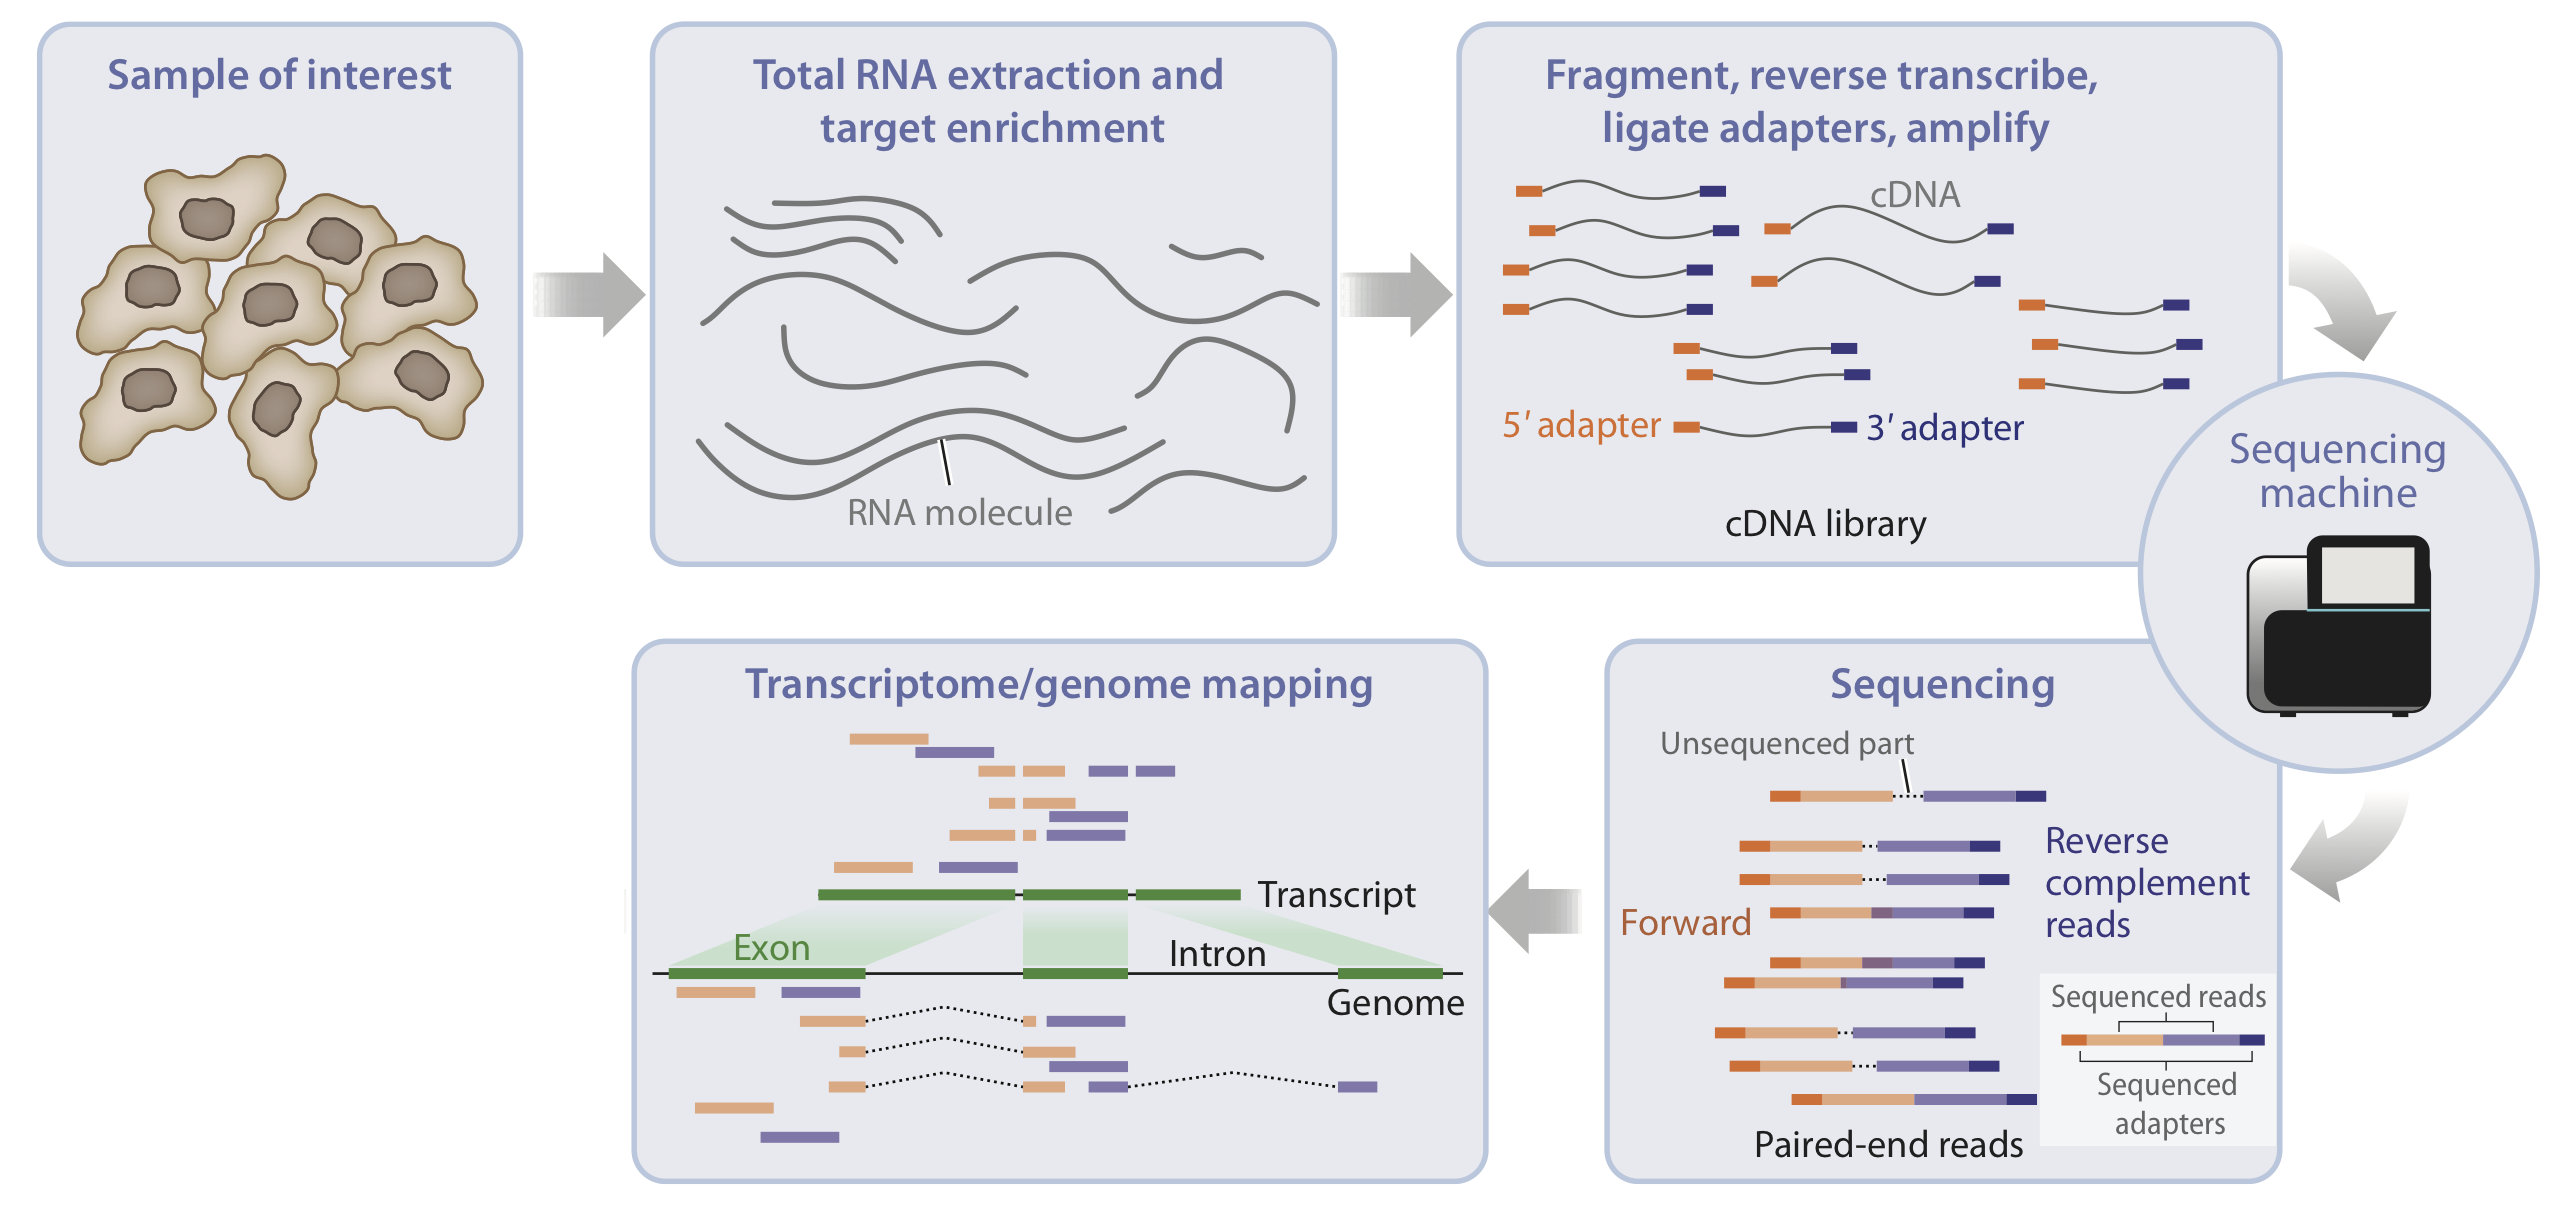 Figure: An updated sequencing workflow, including sequencing and mapping. Image adapted from Van den Berge et al. (2019).